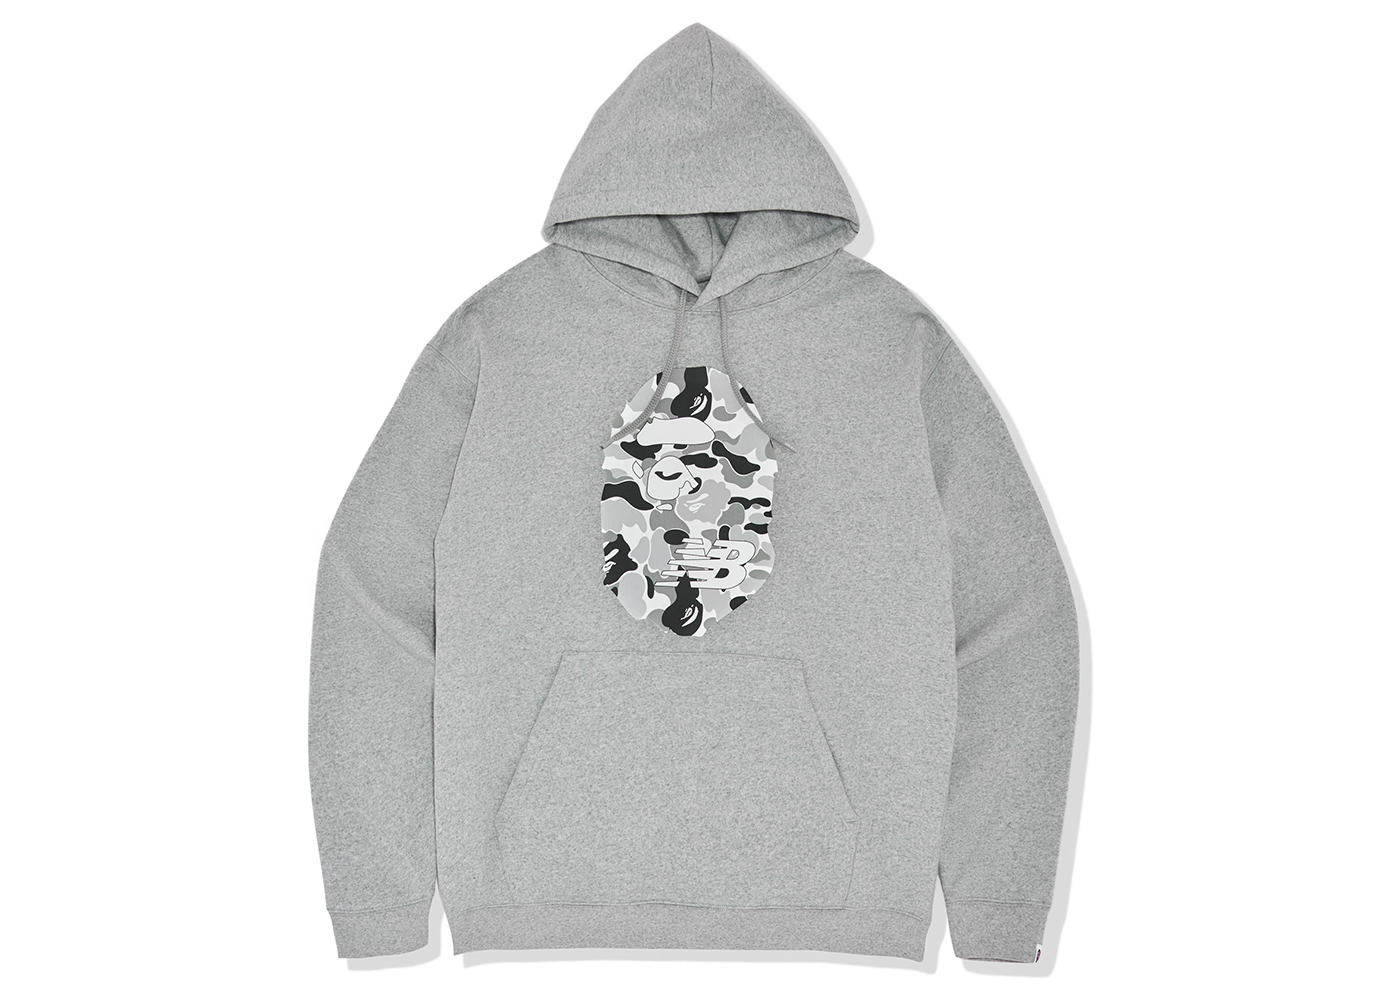 BAPE x New Balance Ape Head Relaxed Fit Pullover Hoodie Grey Men's ...